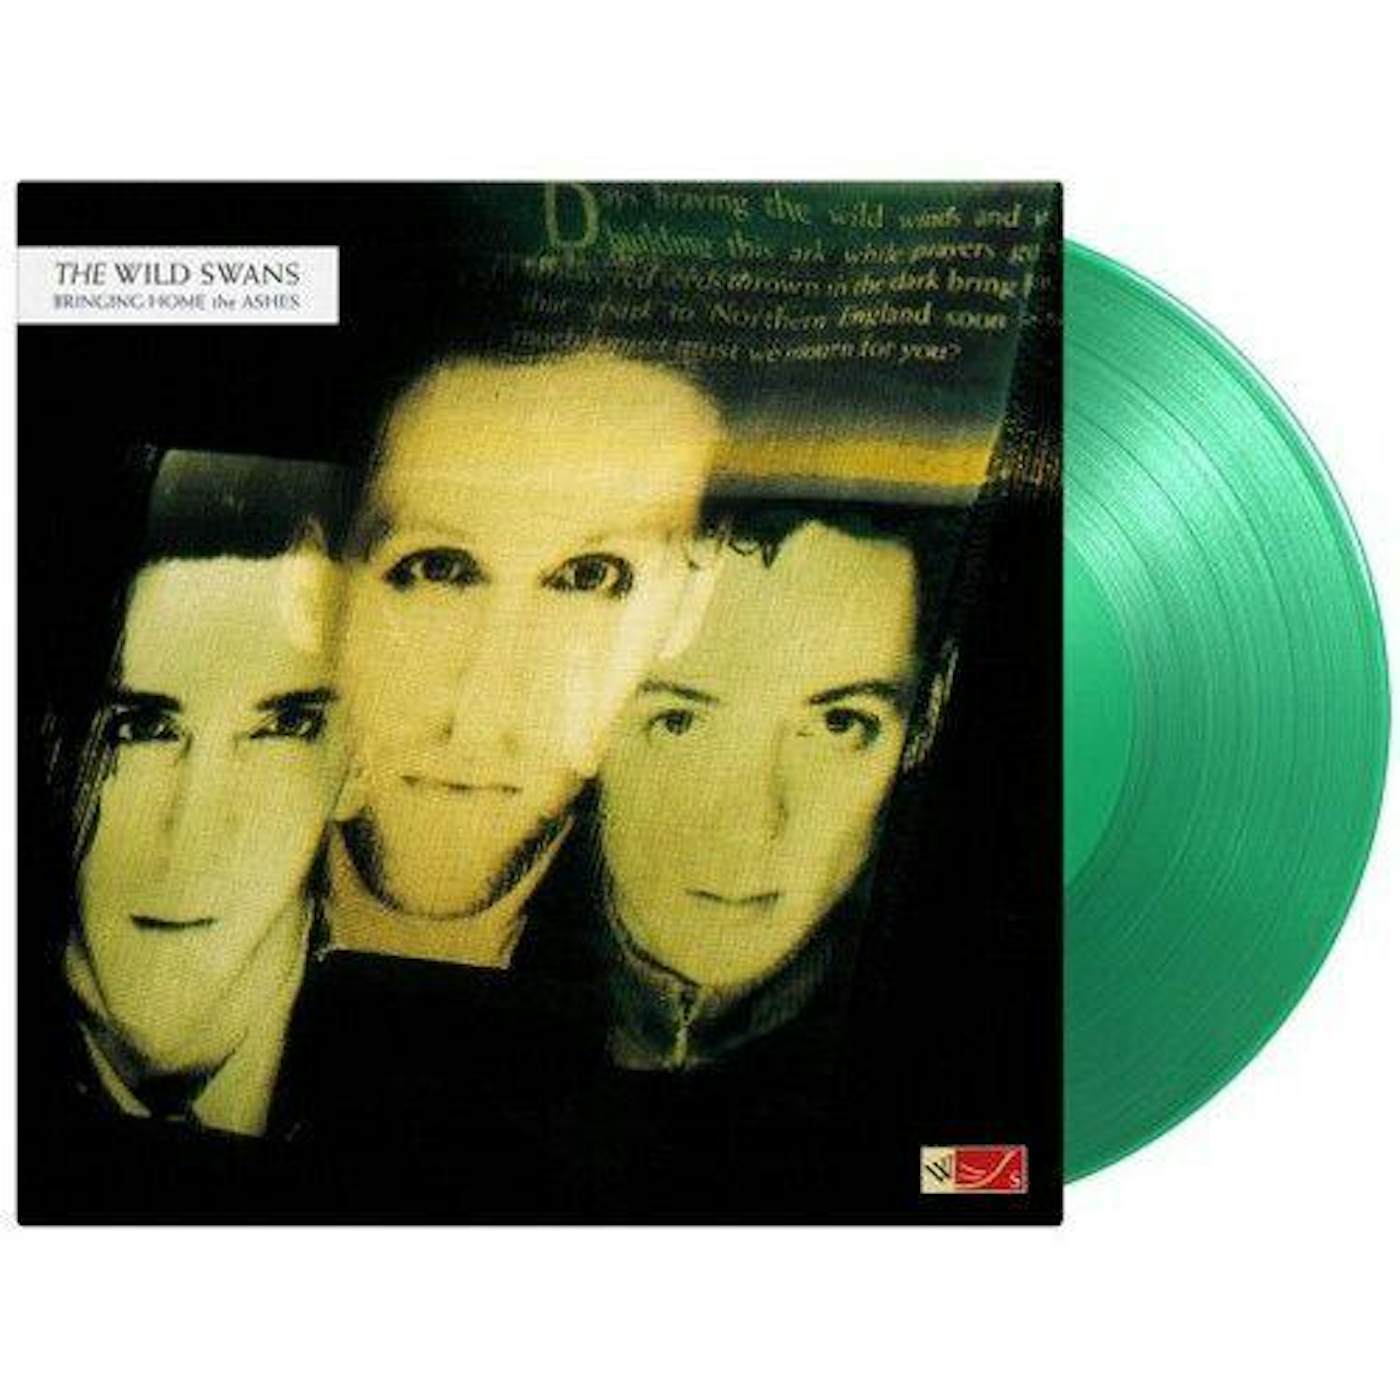 The Wild Swans Bringing Home The Ashes (Ltd Ed/Translucent Green/180G) Vinyl Record